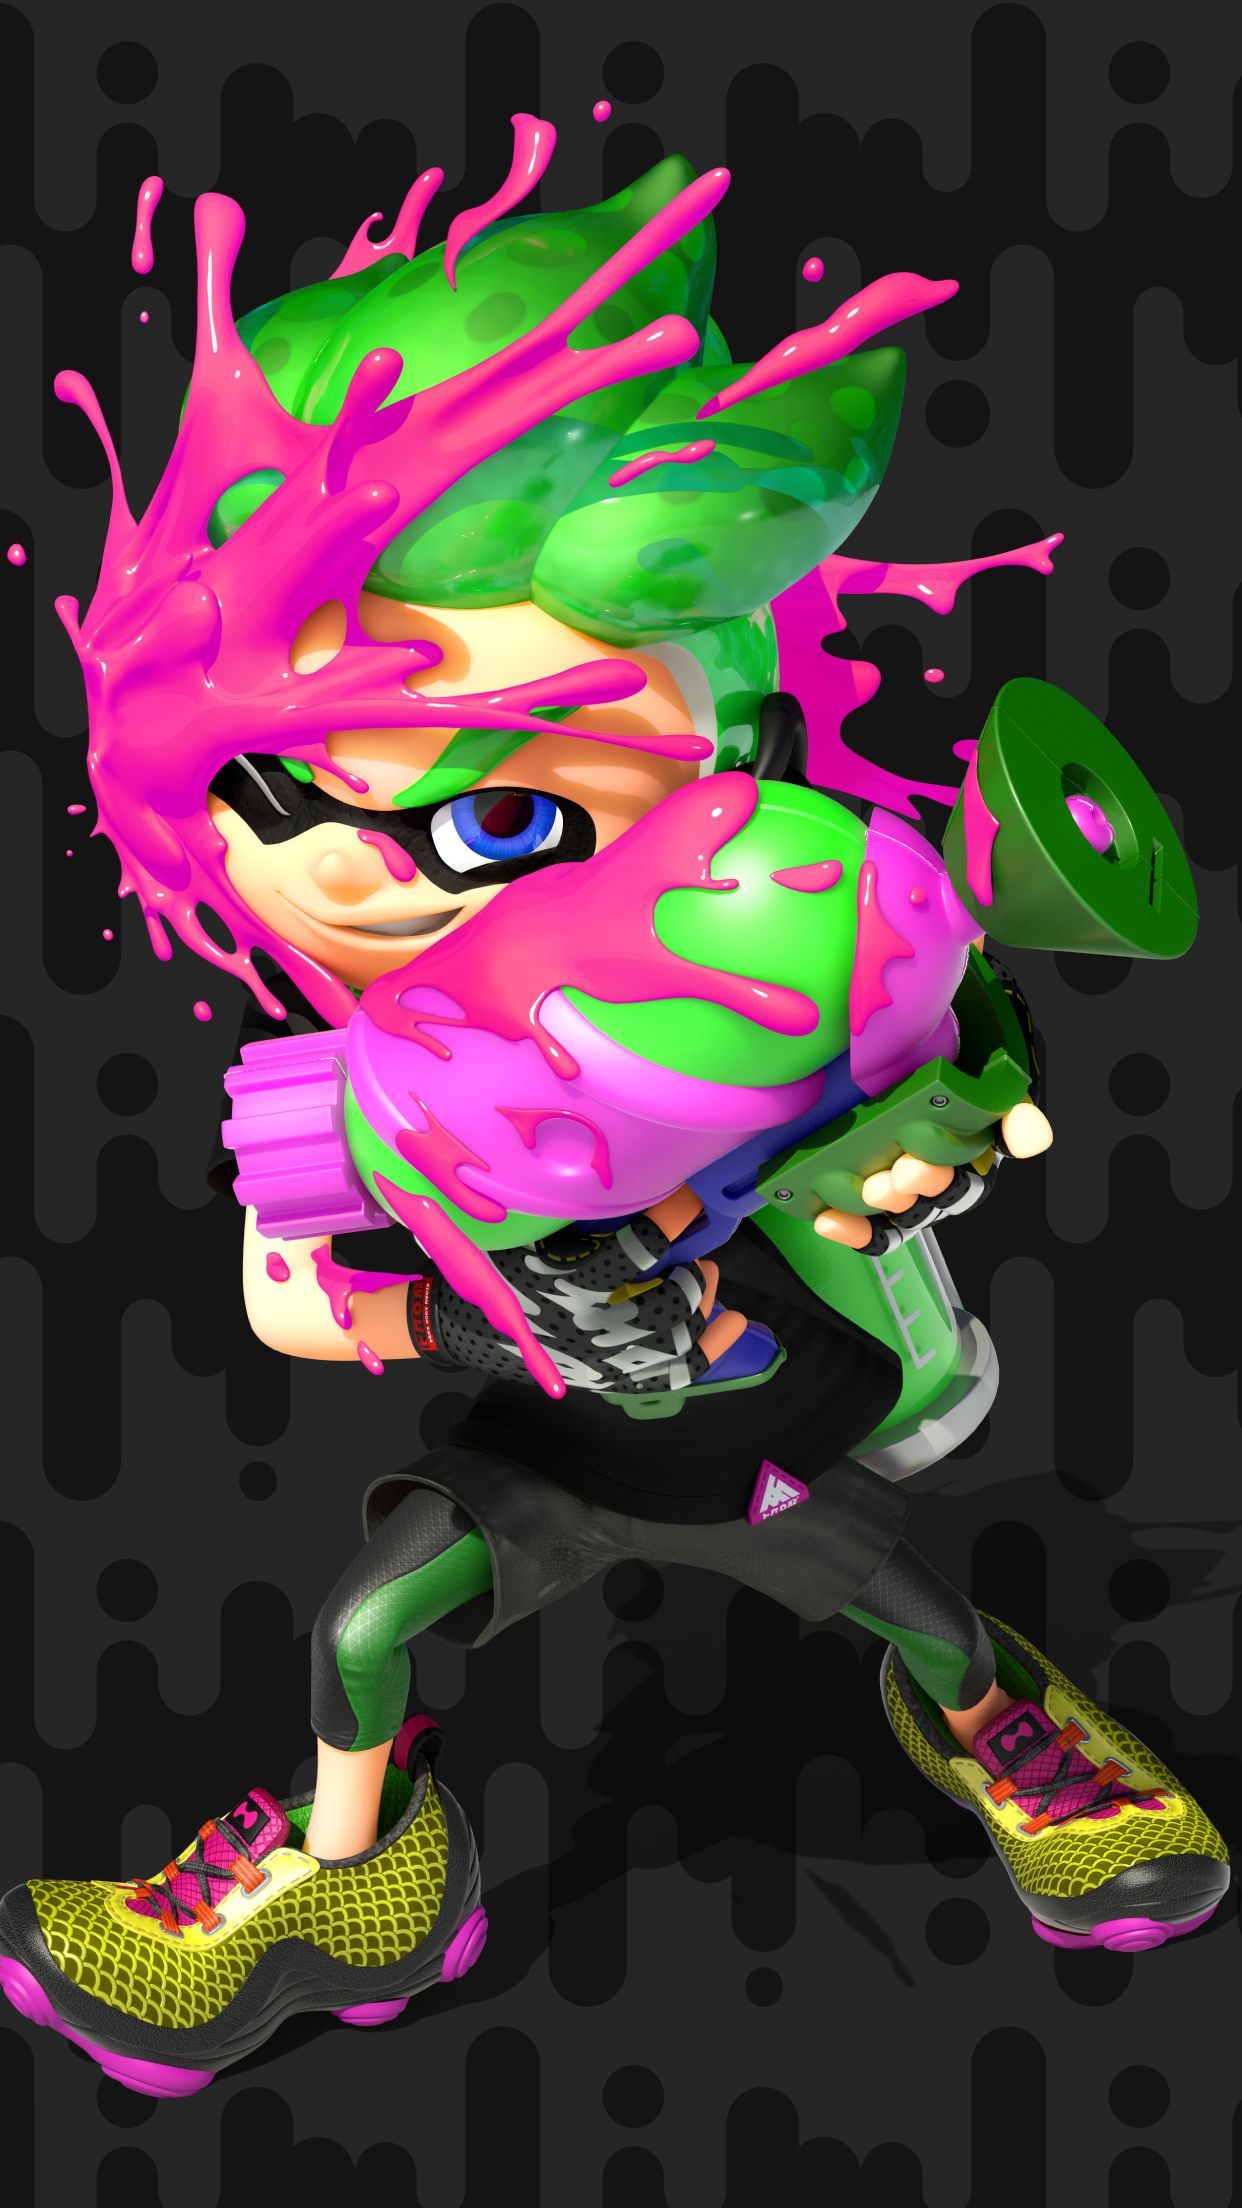 Download Splatoon wallpapers for mobile phone free Splatoon HD pictures